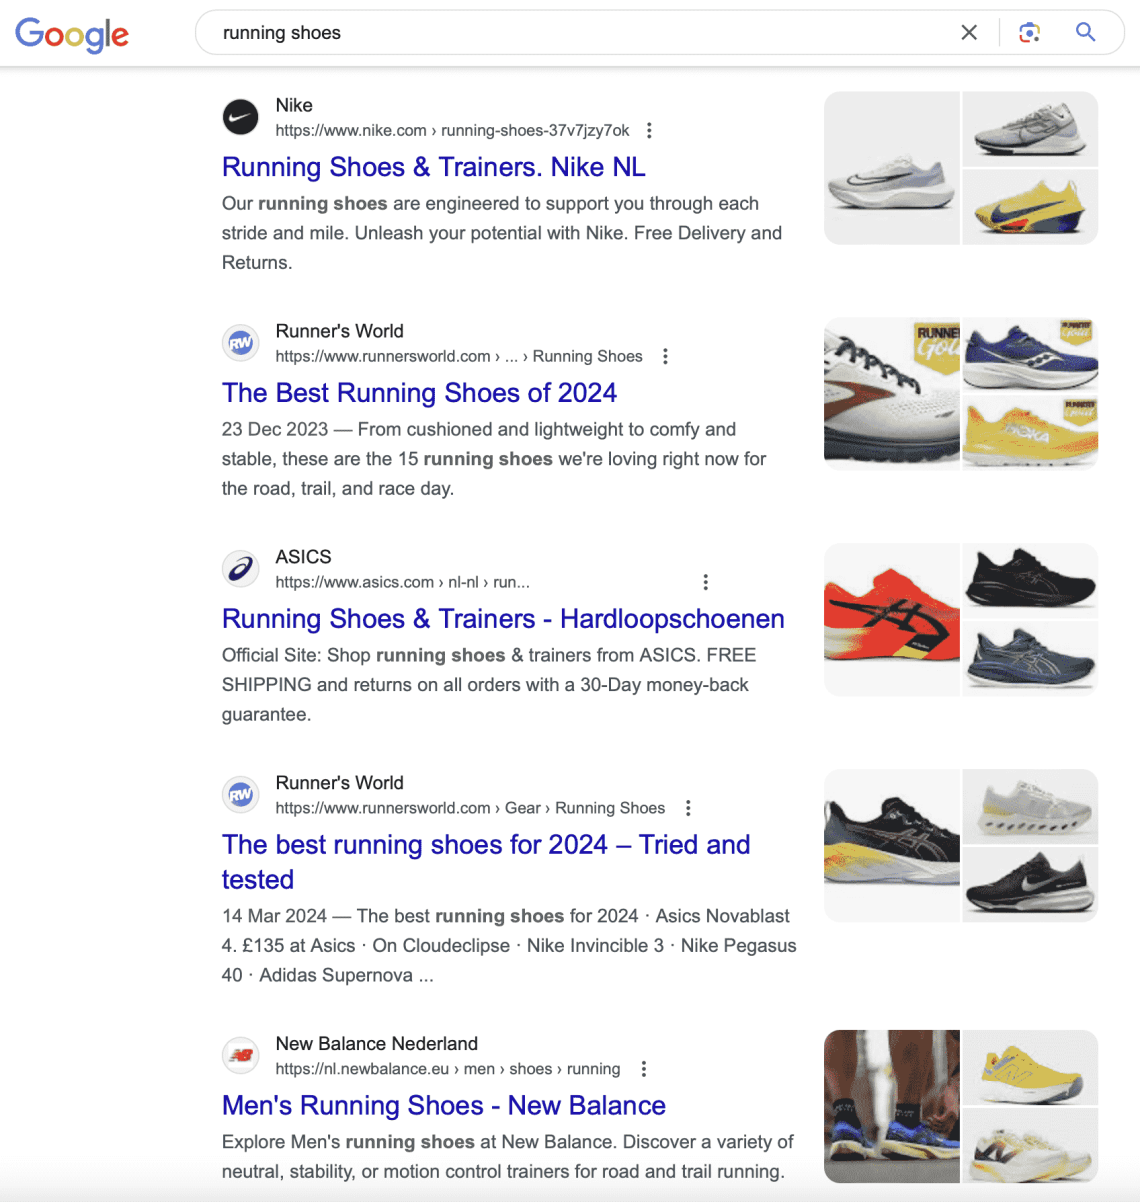 Running shoes search in Google: online visibility of brands in Google